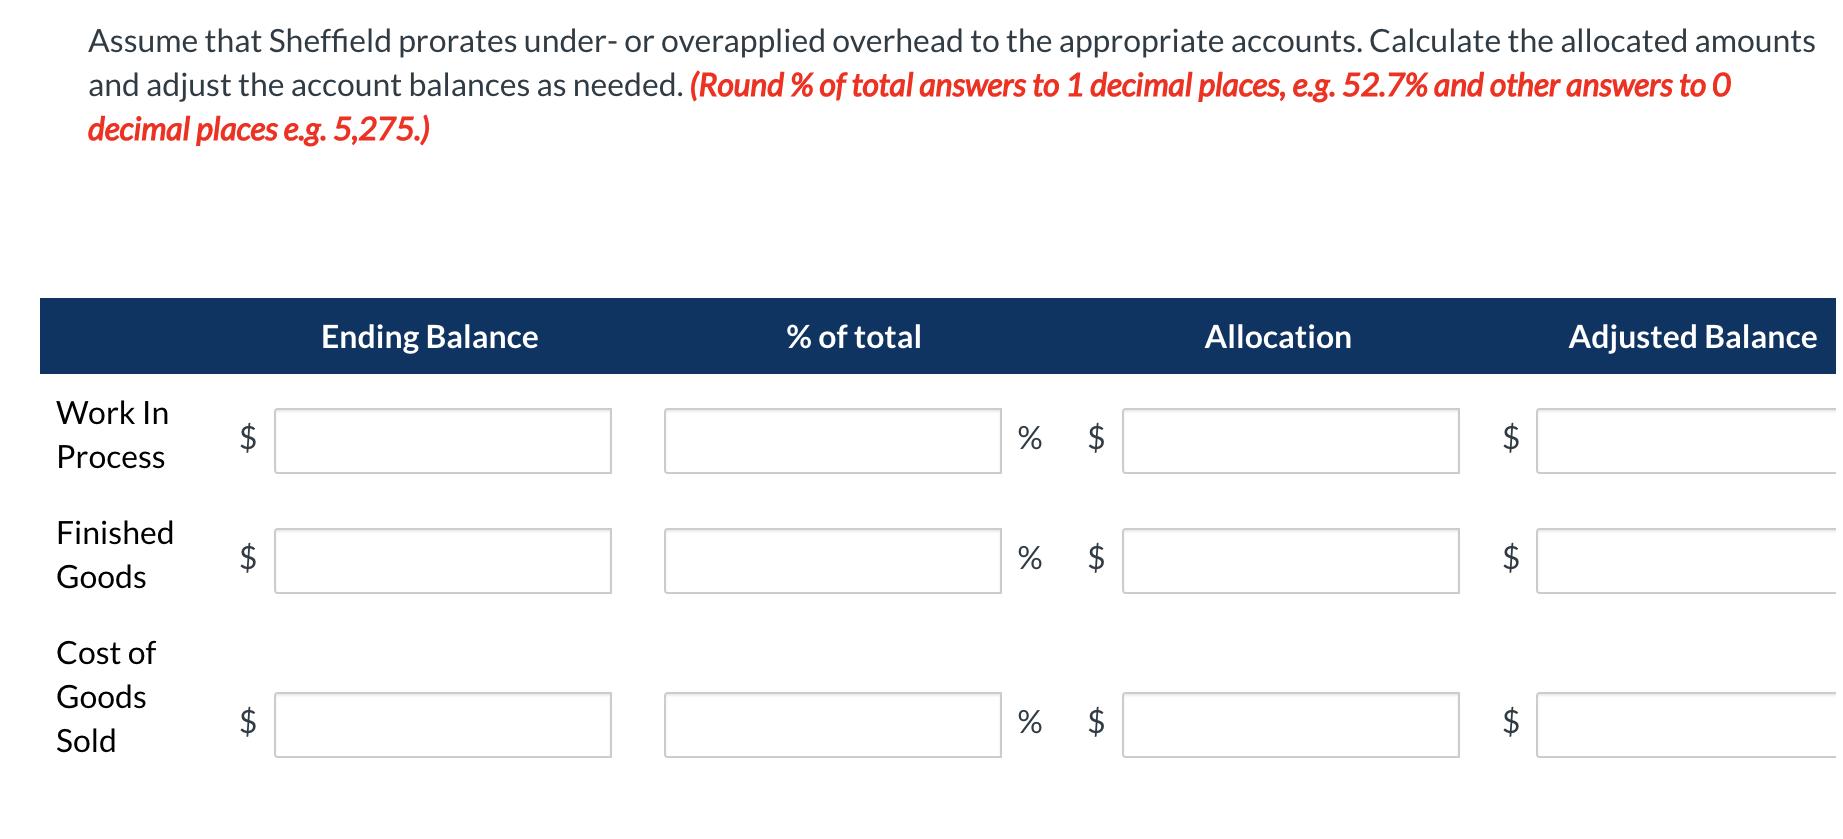 Assume that Sheffield prorates under-or overapplied overhead to the appropriate accounts. Calculate the allocated amounts and